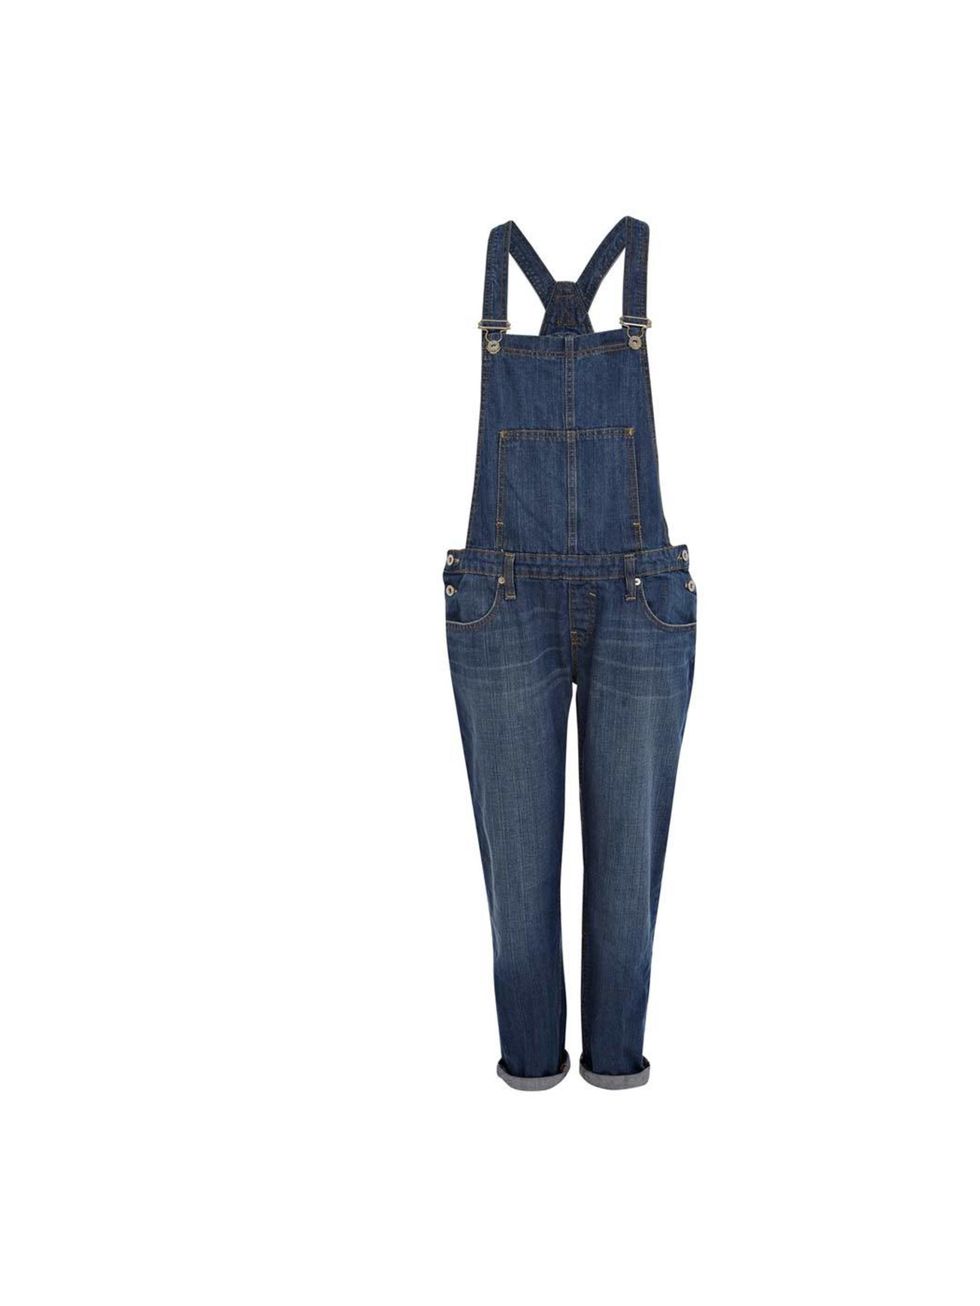 <p>Acting Market & Retail Editor Julia Shutenko wore these denim dungarees to the office with black espadrilles and a white t-shirt for laid-back summer style, throwing on a pair of neon yellow court shoes for evening.</p><p><a href="http://www.riverislan